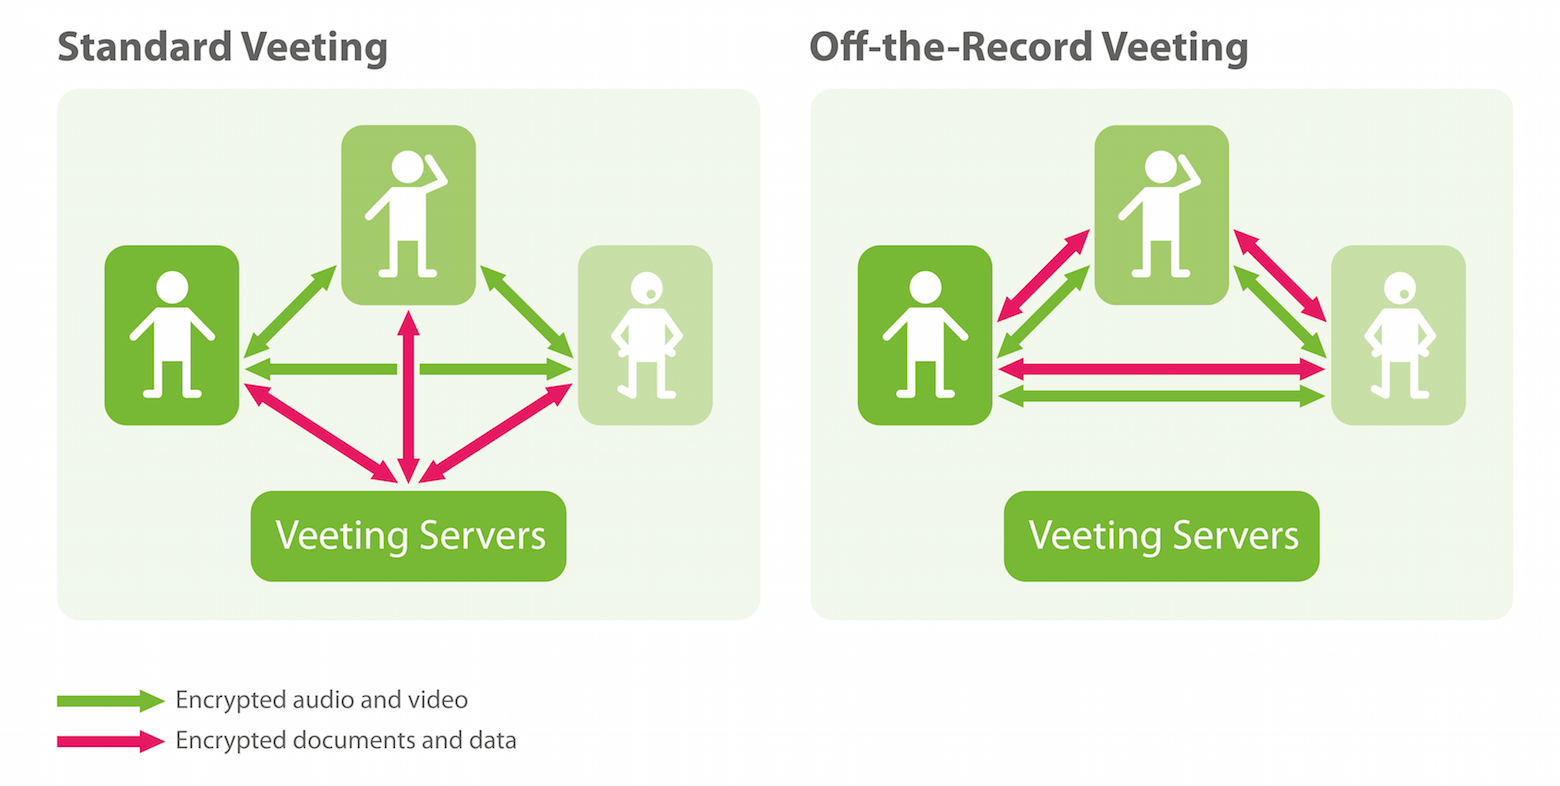 'Off-the-Record' Veetings